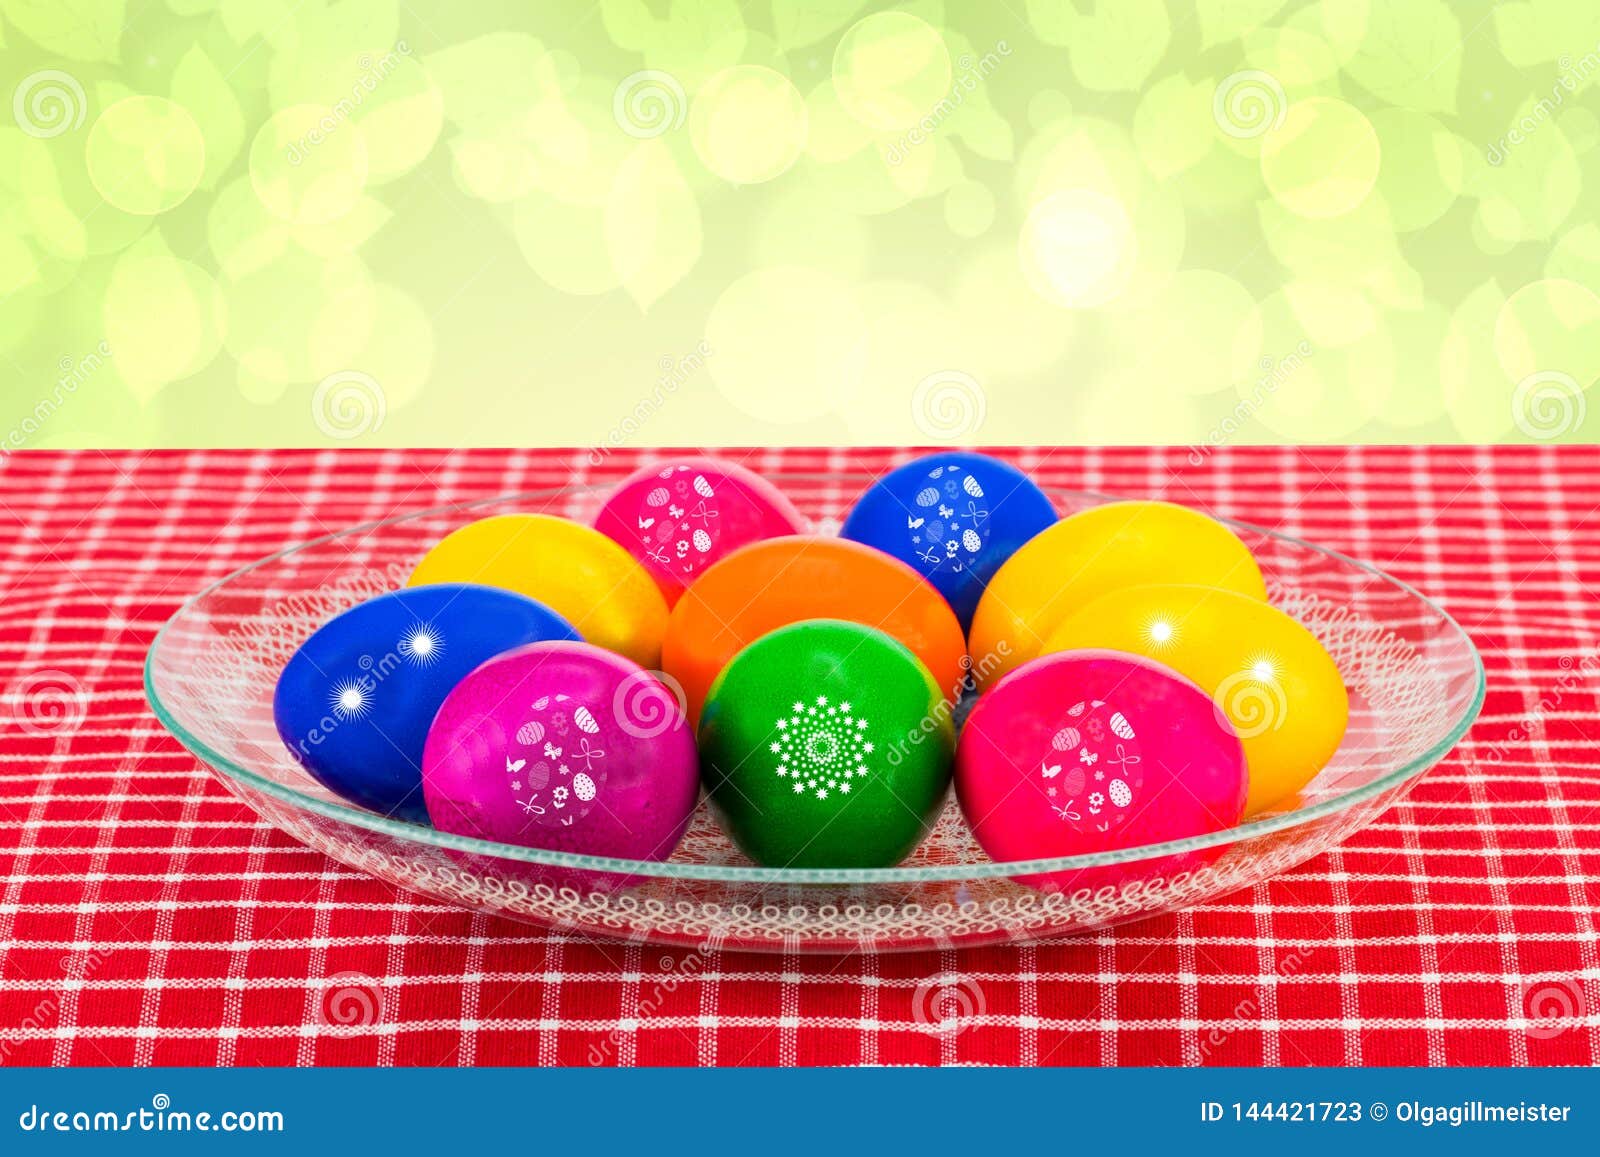 Easter Decorations Background. Colorful Easter Eggs in a Glass Bowl on ...